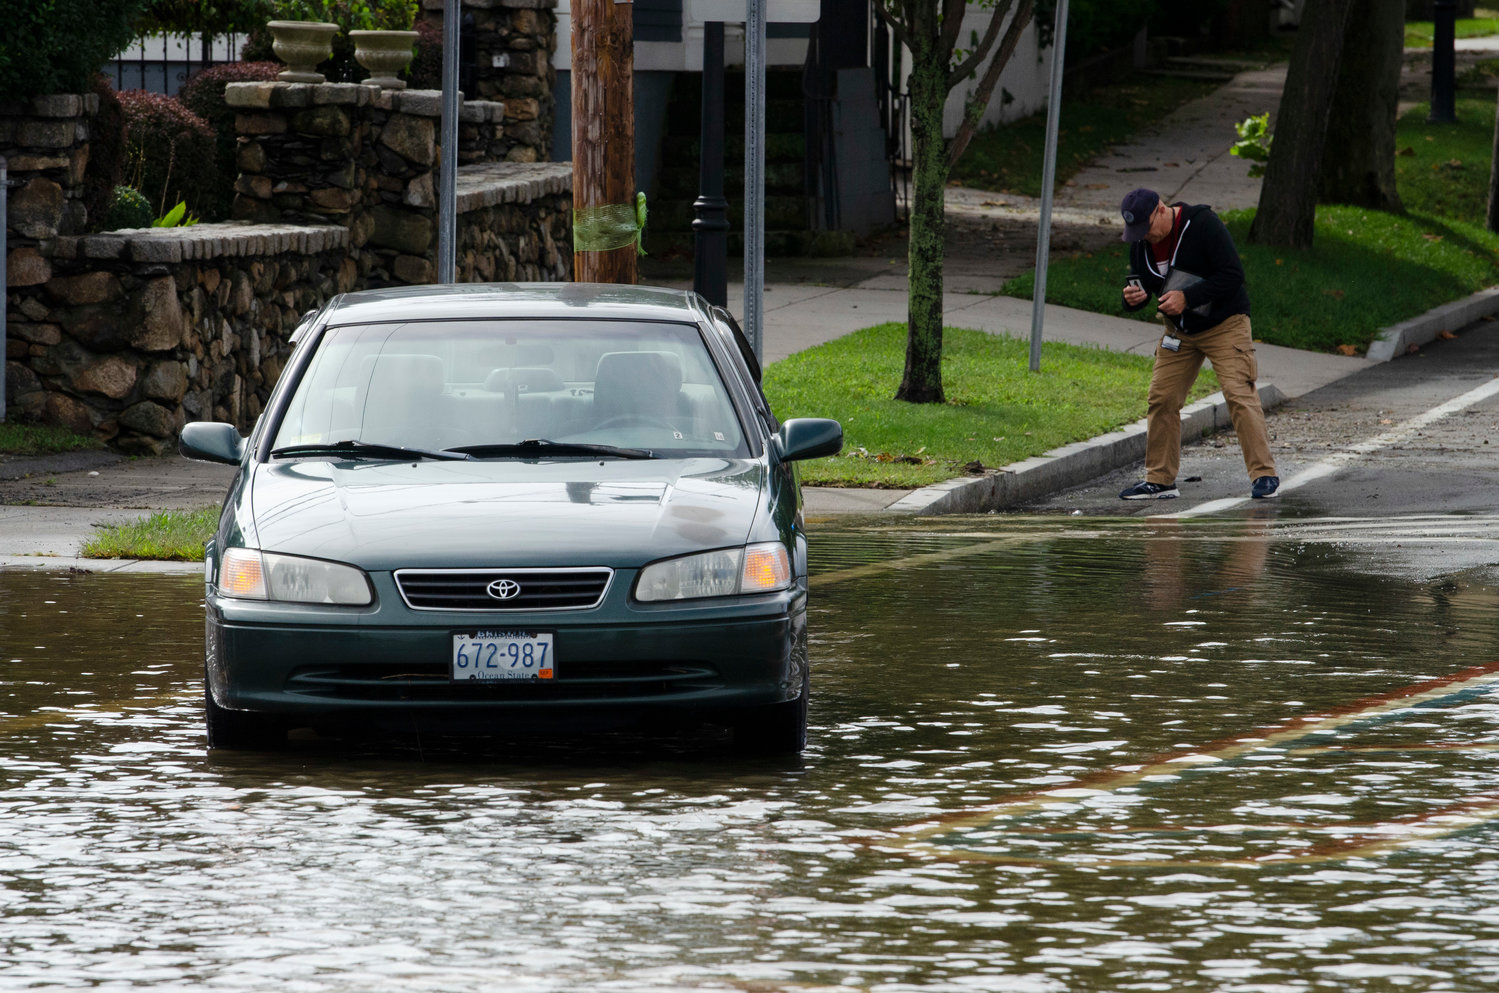 A man takes photographs as a stuck vehicle sits in the flooded water on Hope Street.